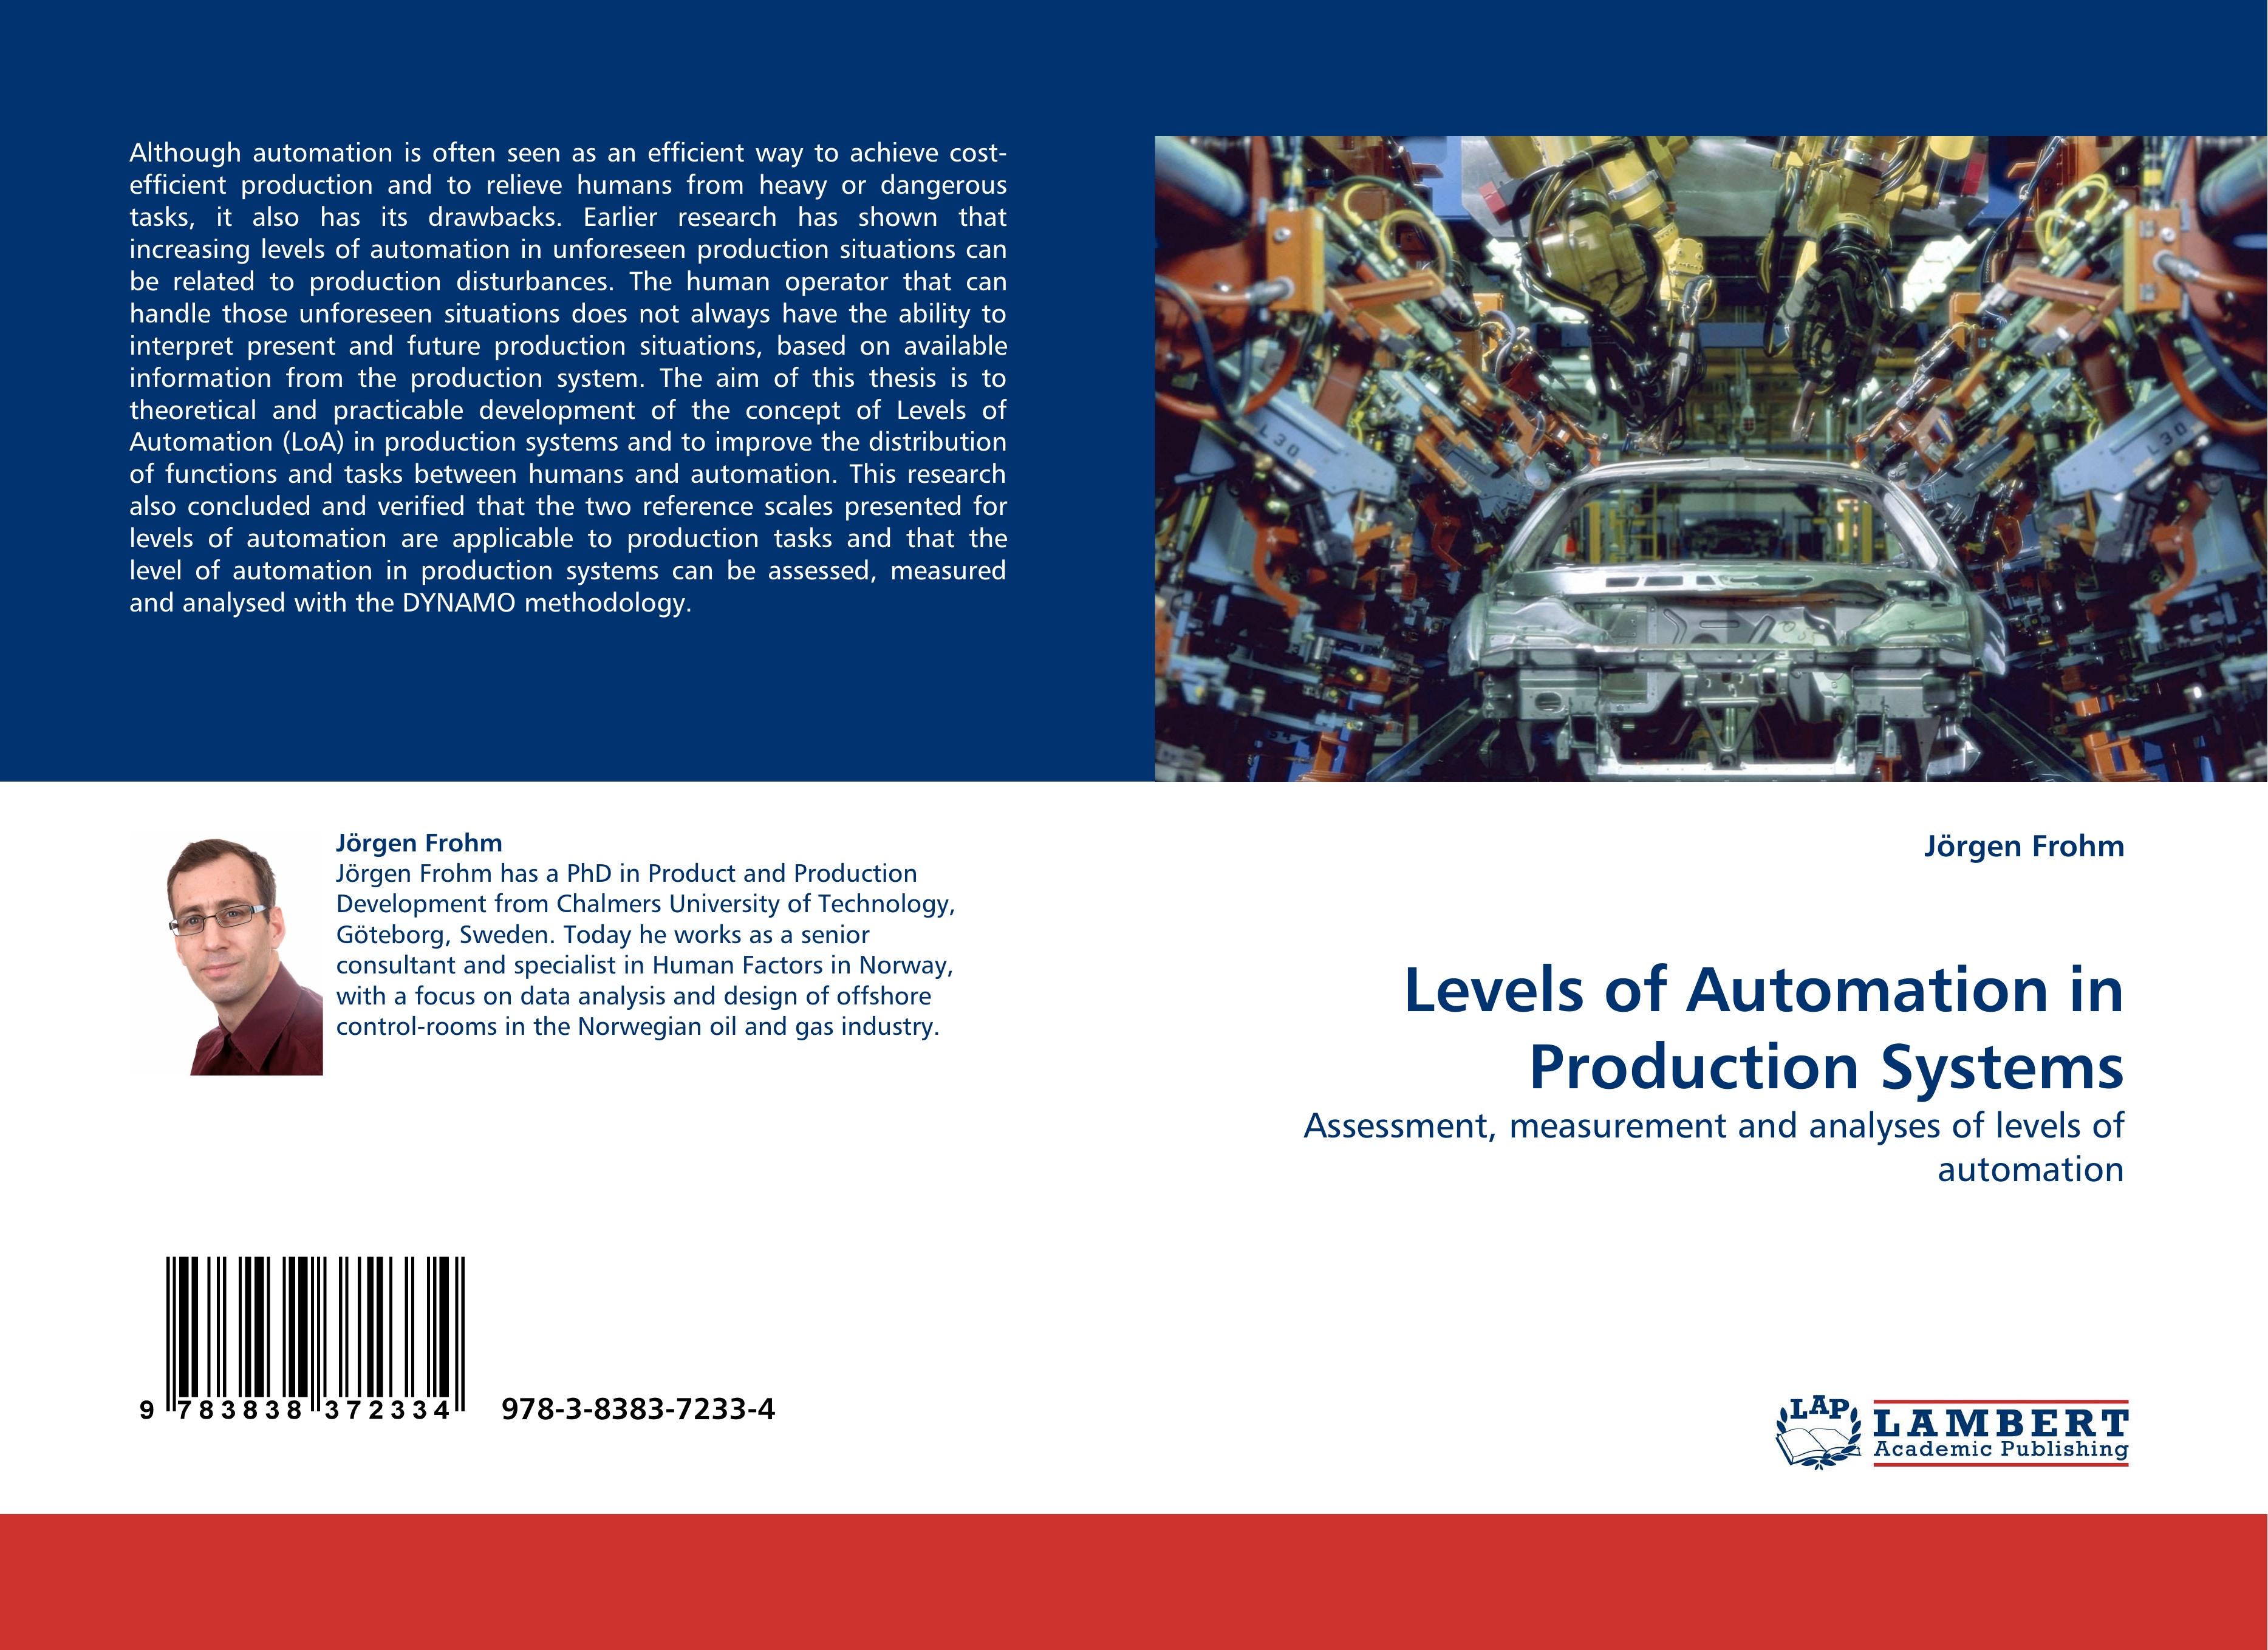 Levels of Automation in Production Systems | Assessment, measurement and analyses of levels of automation | Jörgen Frohm | Taschenbuch | Paperback | 100 S. | Englisch | 2010 | EAN 9783838372334 - Frohm, Jörgen